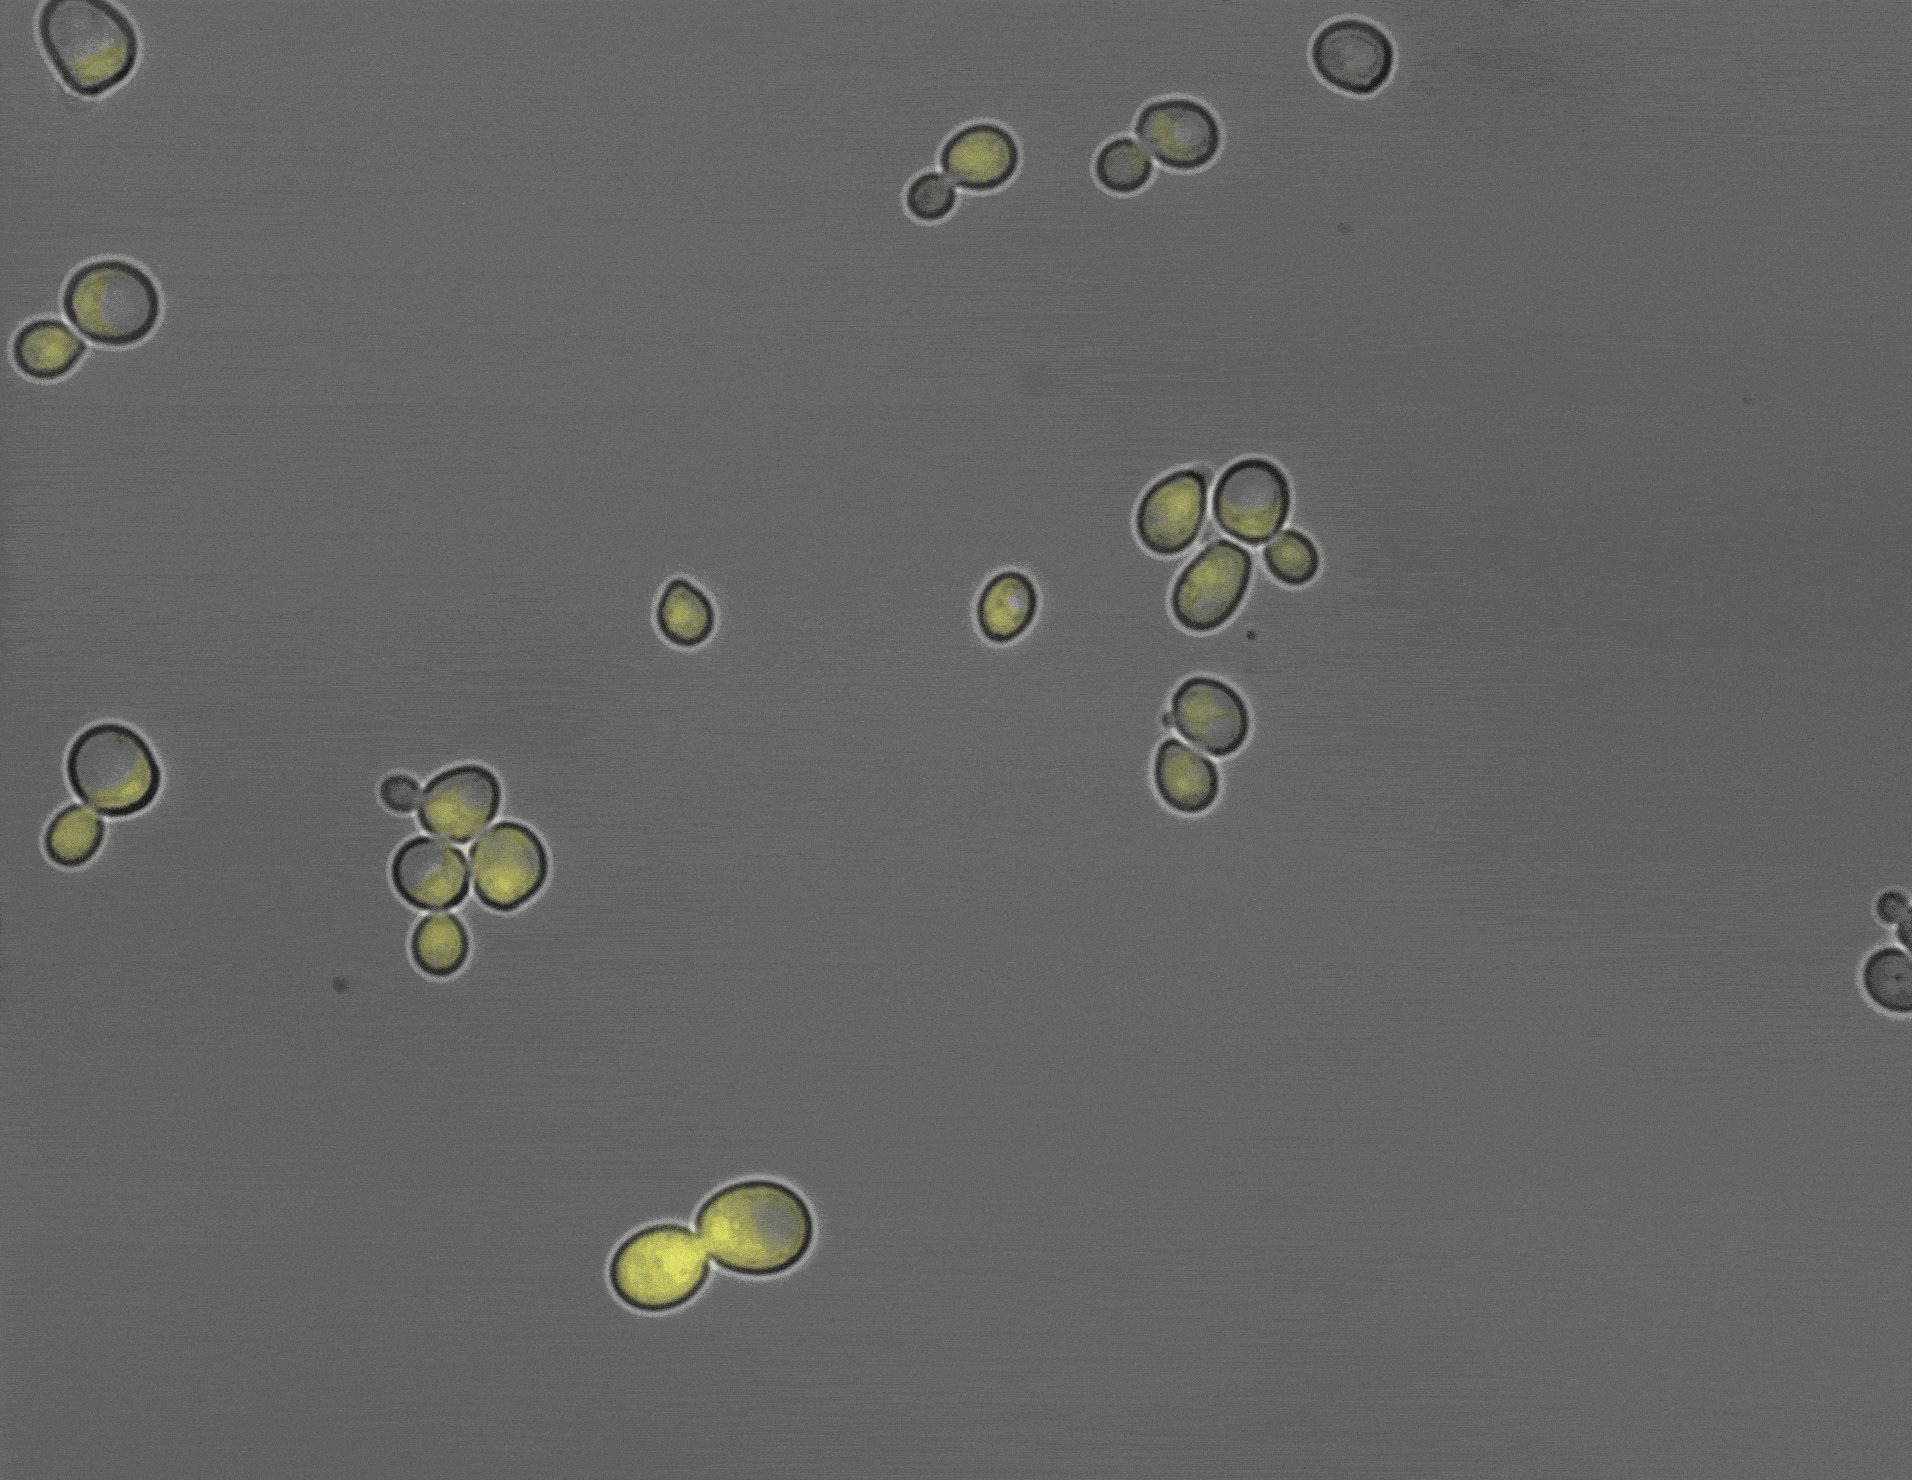 Animation that shows yeast cells expressing a Yellow Fluorescent Protein, which we use as a read-out of gene expression in living cells. 